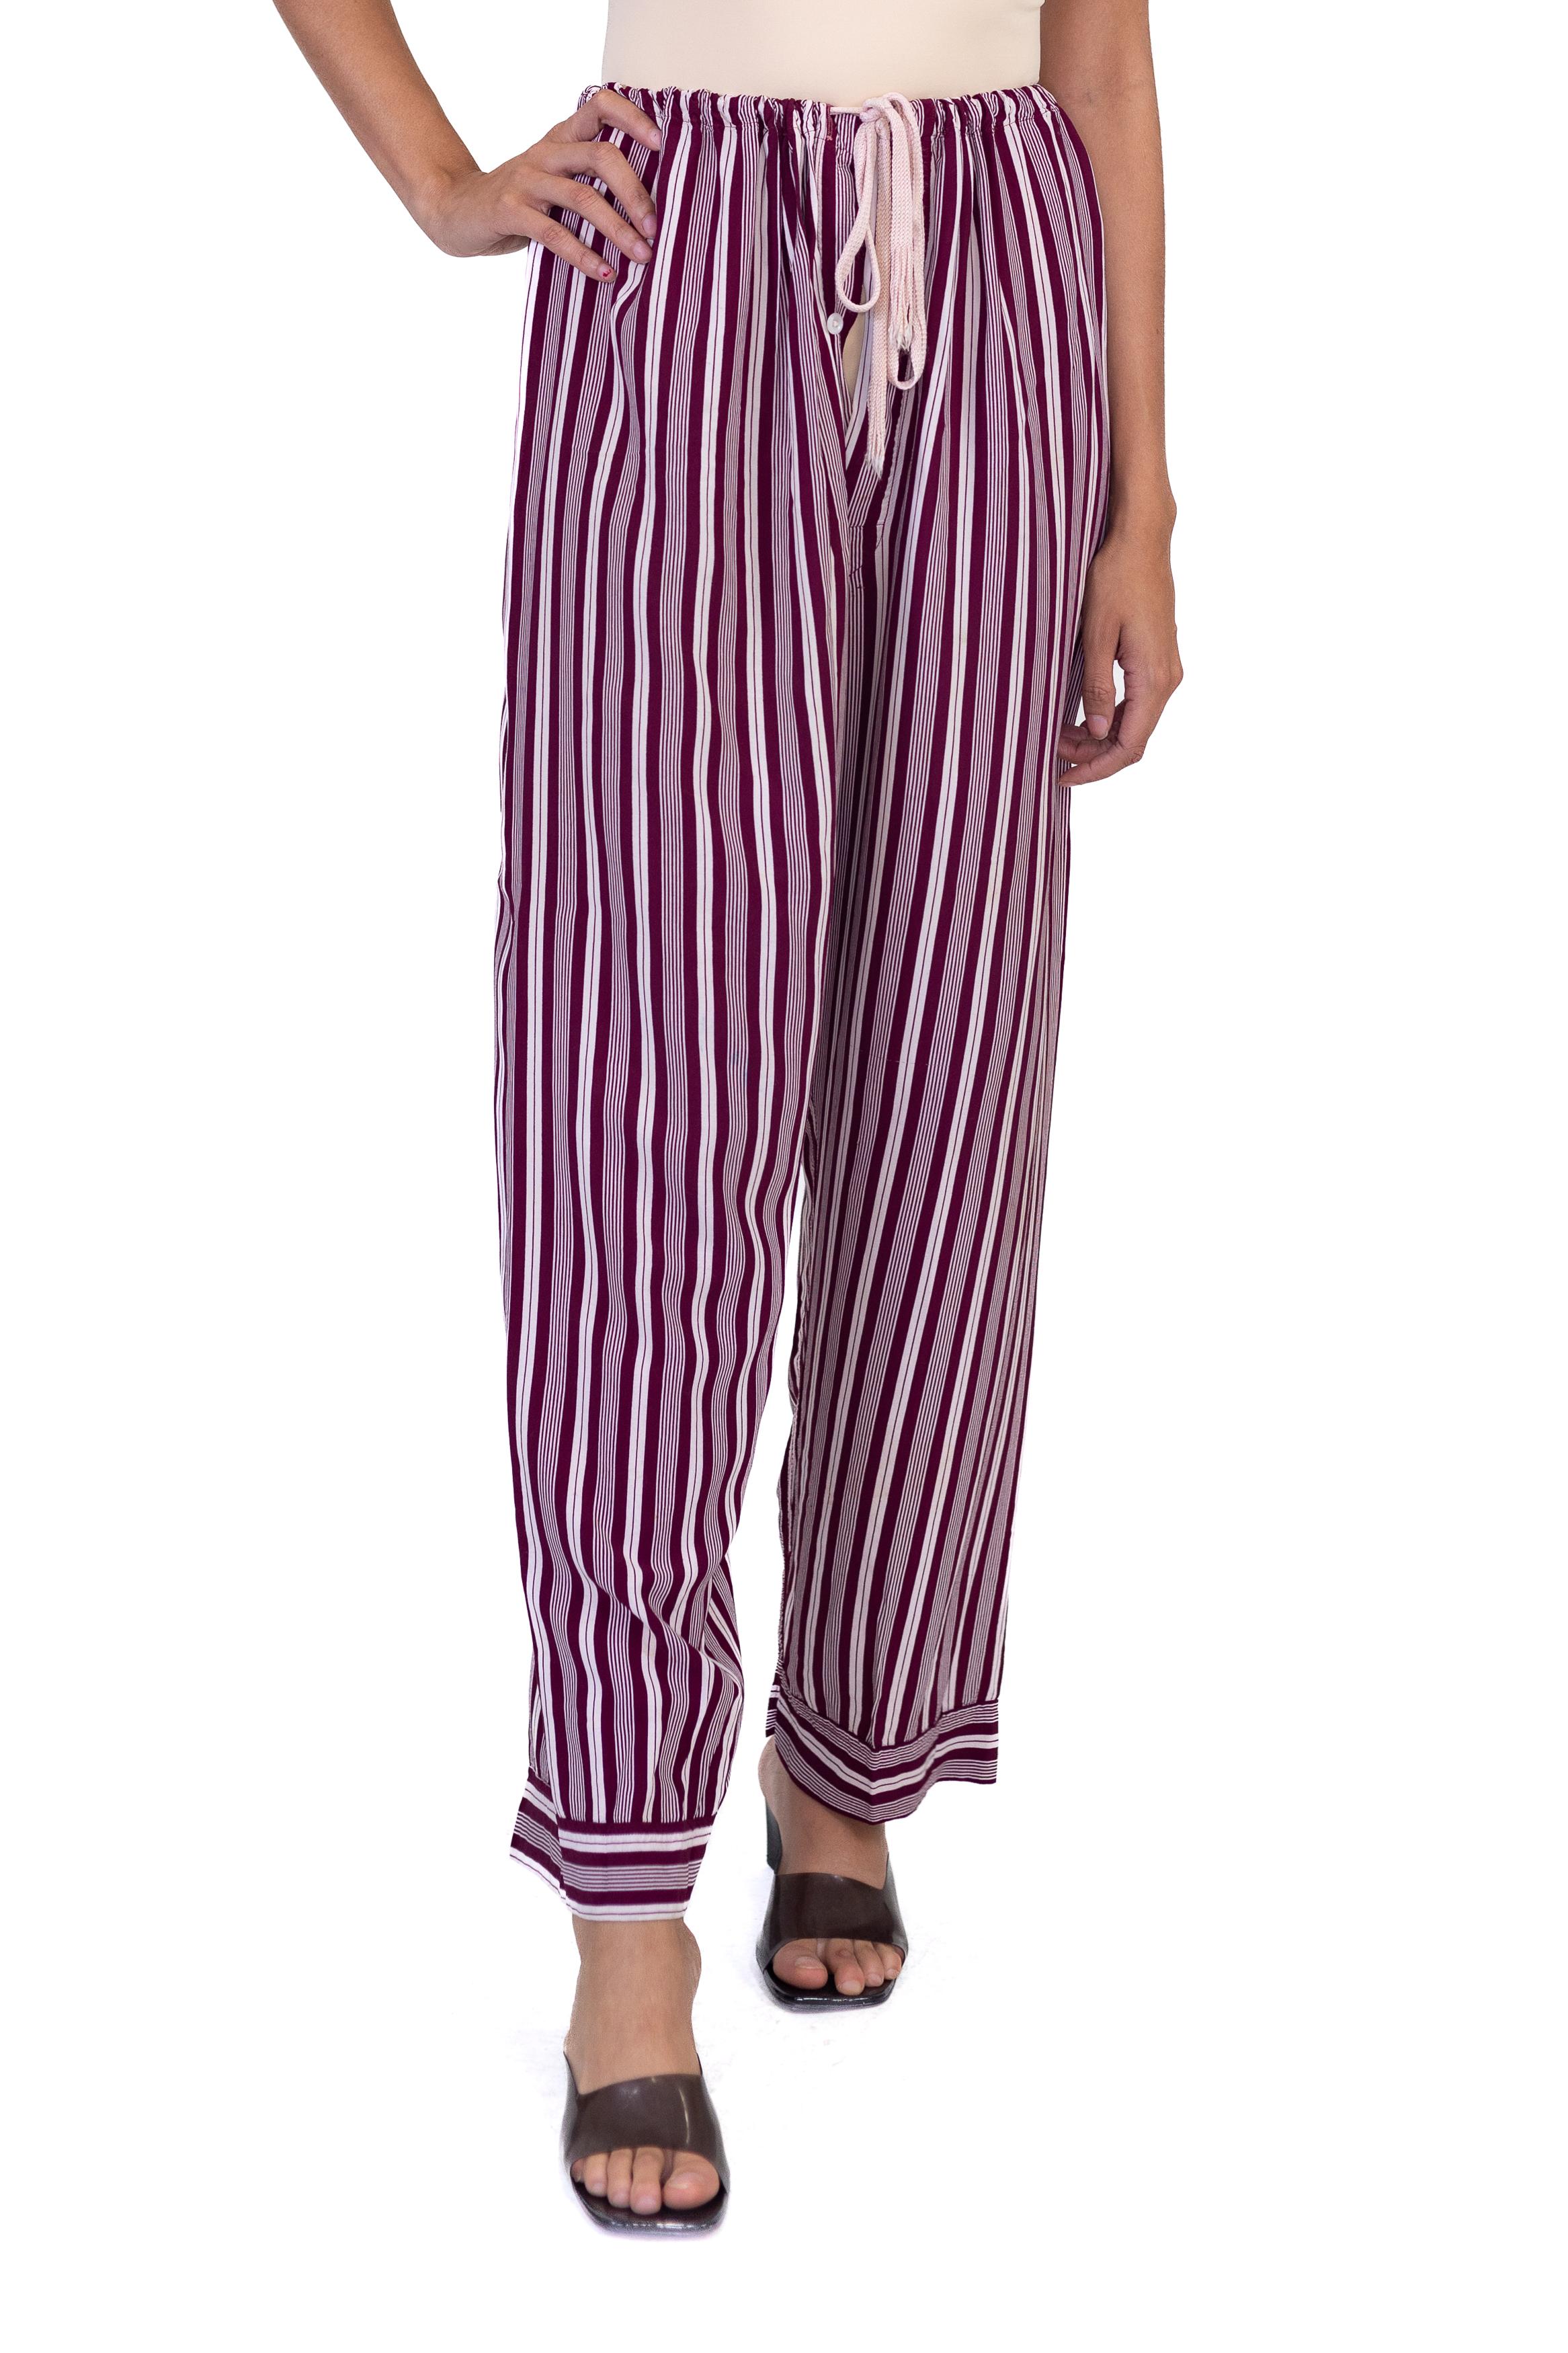 Women's or Men's 1940S Burgundy Striped Rayon Pajama Pants For Sale